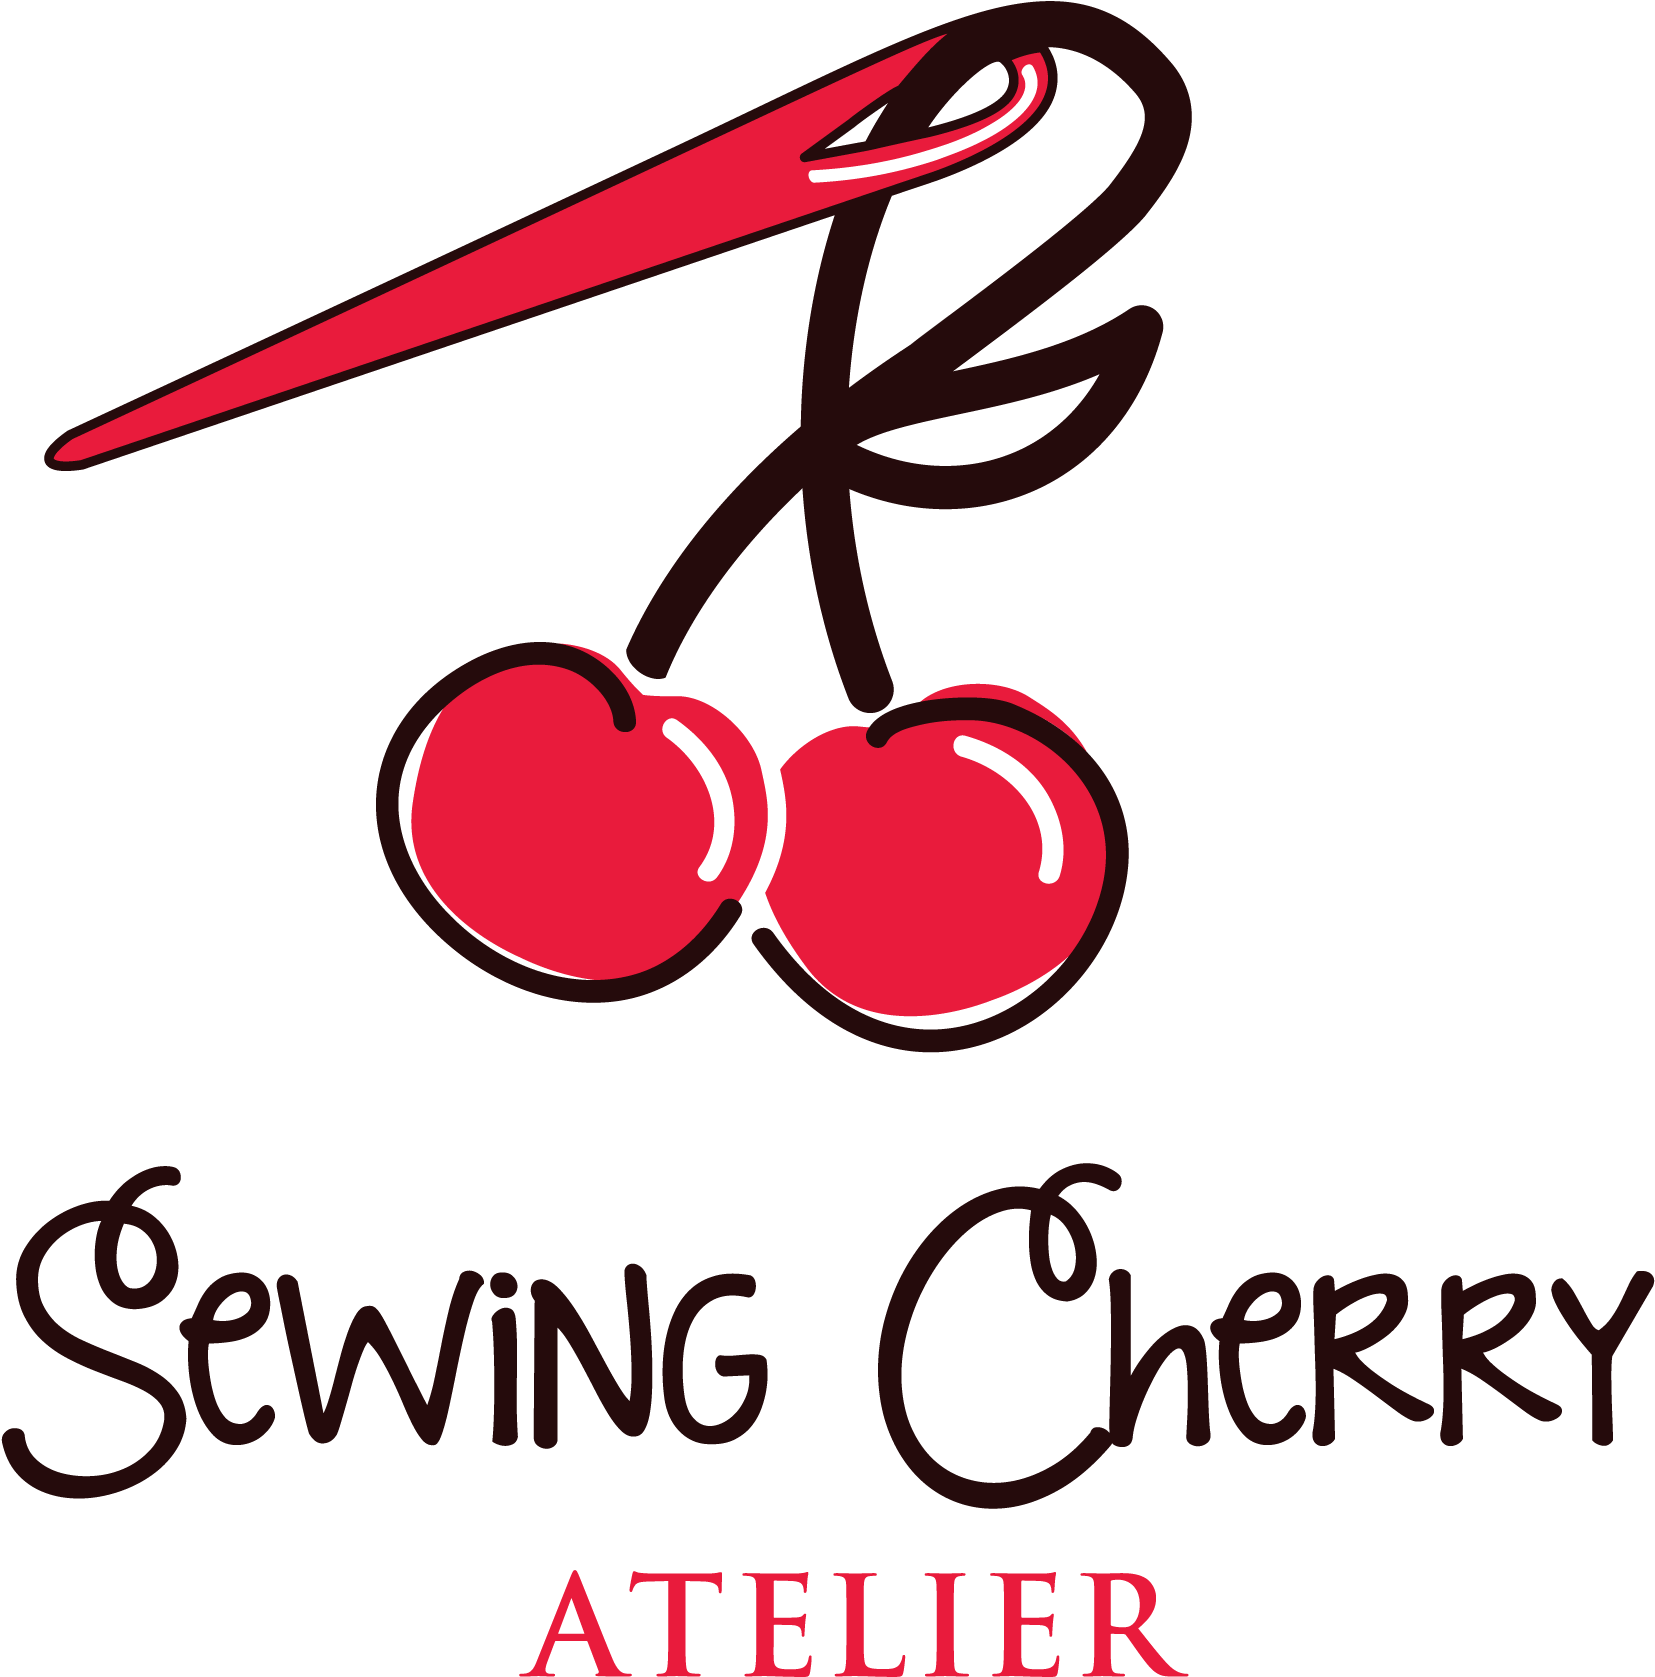 A Logo Of A Sewing Cherry